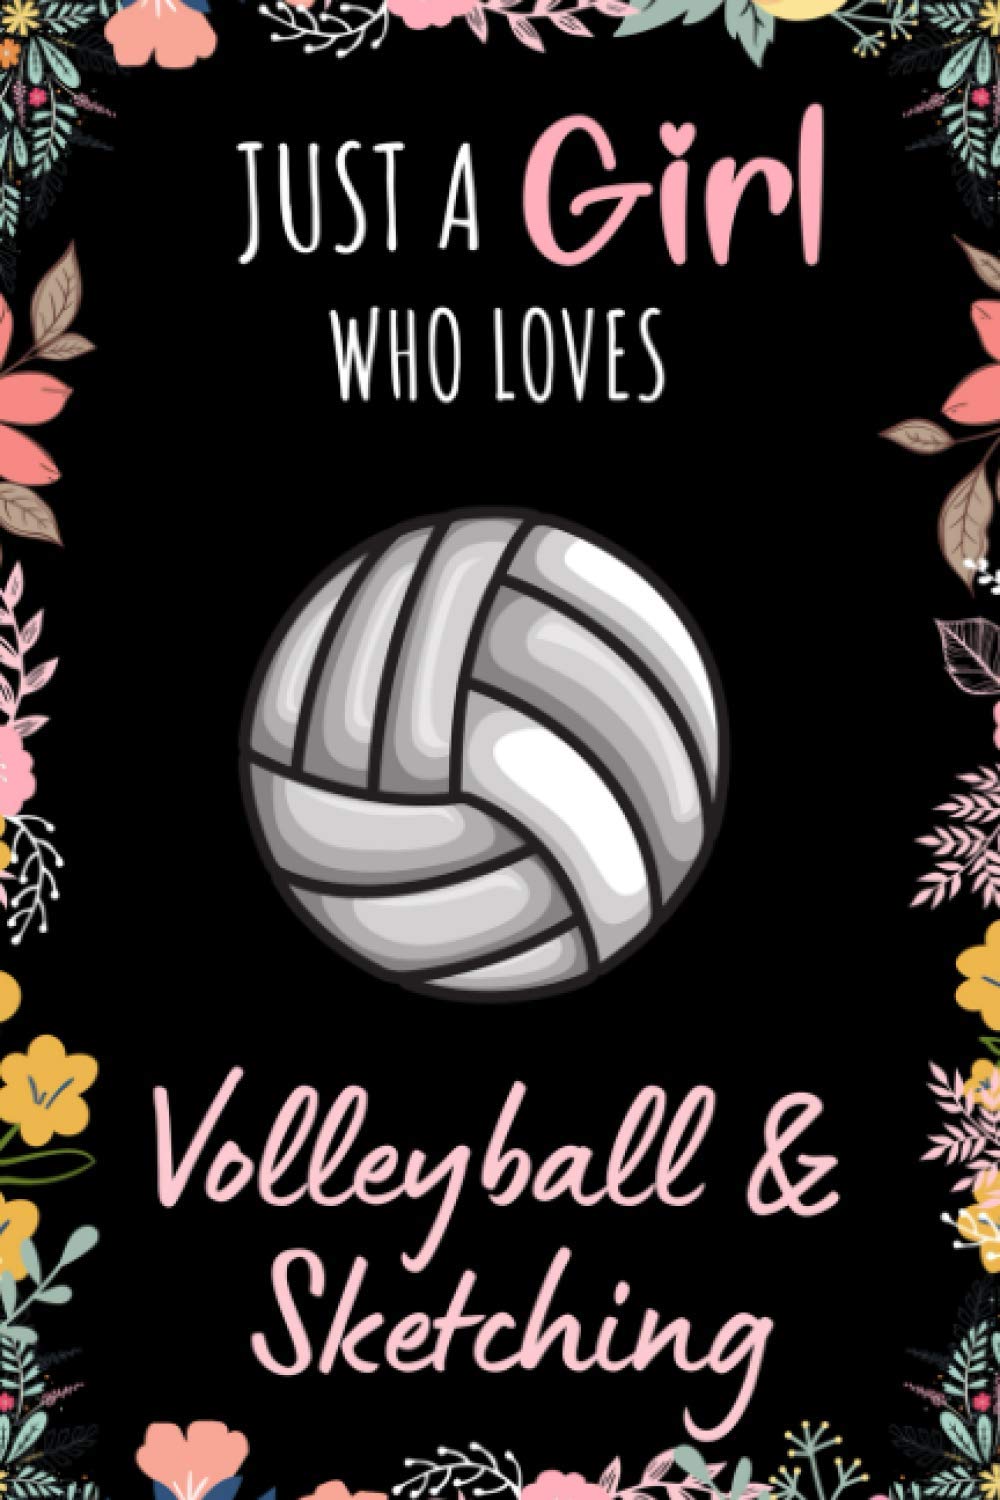 Share 72+ cool volleyball wallpapers best - in.cdgdbentre